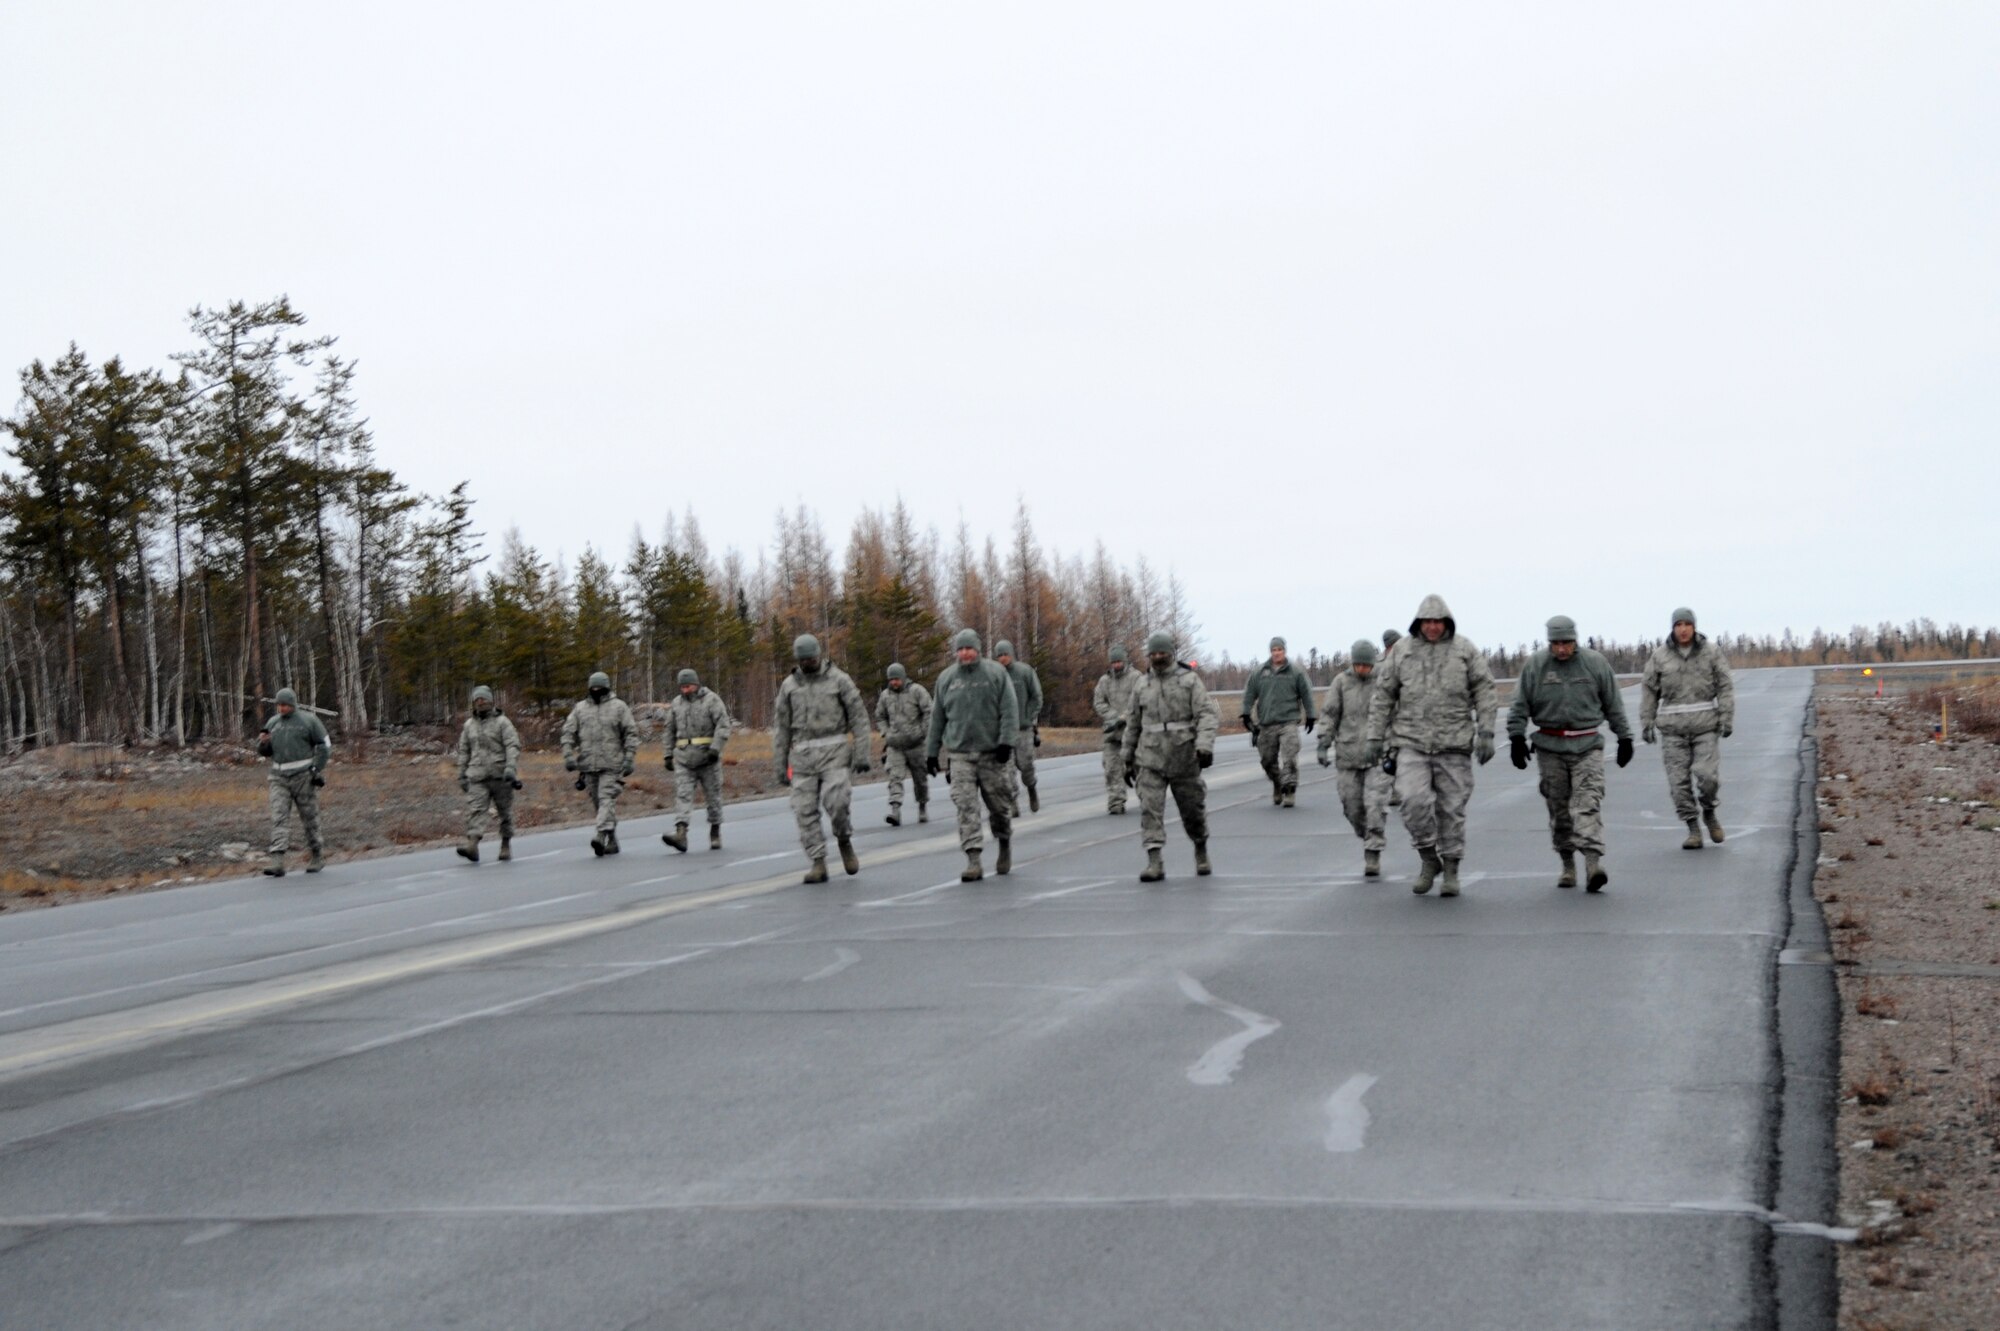 Members of 142nd Maintenance Group check the taxiway for debris, in preparation for the return of the F-15 Eagles supporting Exercise Vigilant Shield 2017, Yellowknife, Northwest Territories, Oct. 20, 2016.  During this exercise, forces supporting North American Aerospace Defense Command (NORAD) will deploy and conduct air sovereignty operations in the far north and the high Arctic demonstrating the ability to detect, identify and meet possible threats in some of the most remote regions in the world.  (U.S. Air National Guard photo by Senior Master Sgt. Shelly Davison, 142nd Fighter Wing Public Affairs). 